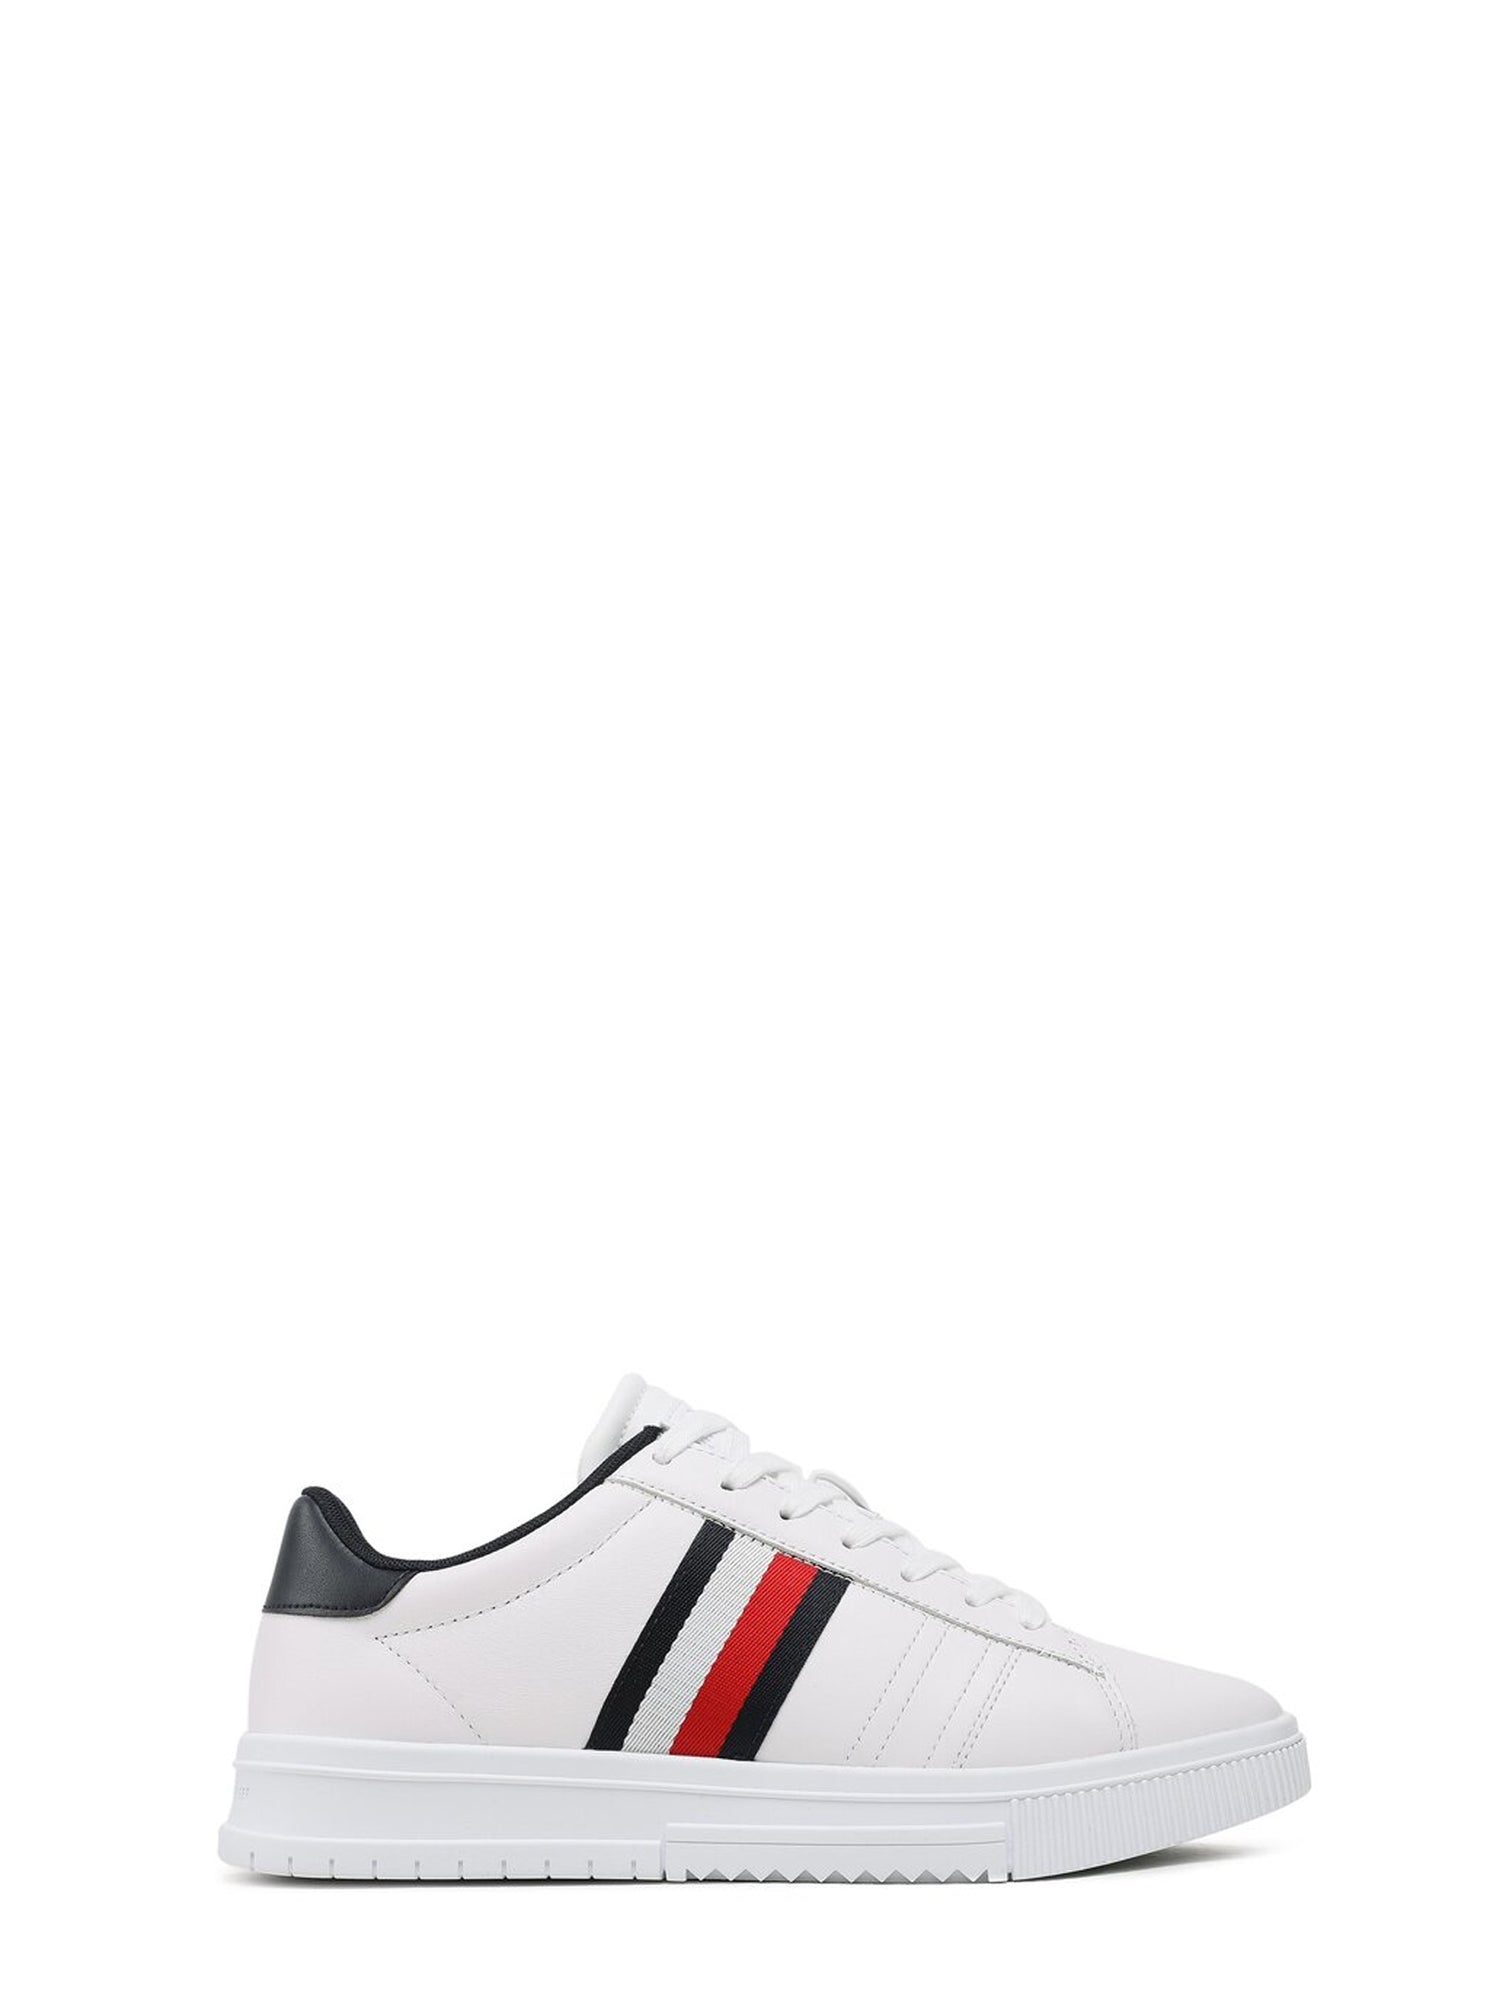 TOMMY HILFIGER SHOES SNEAKERS BASSE SUPERCUP LEATHER BIANCO